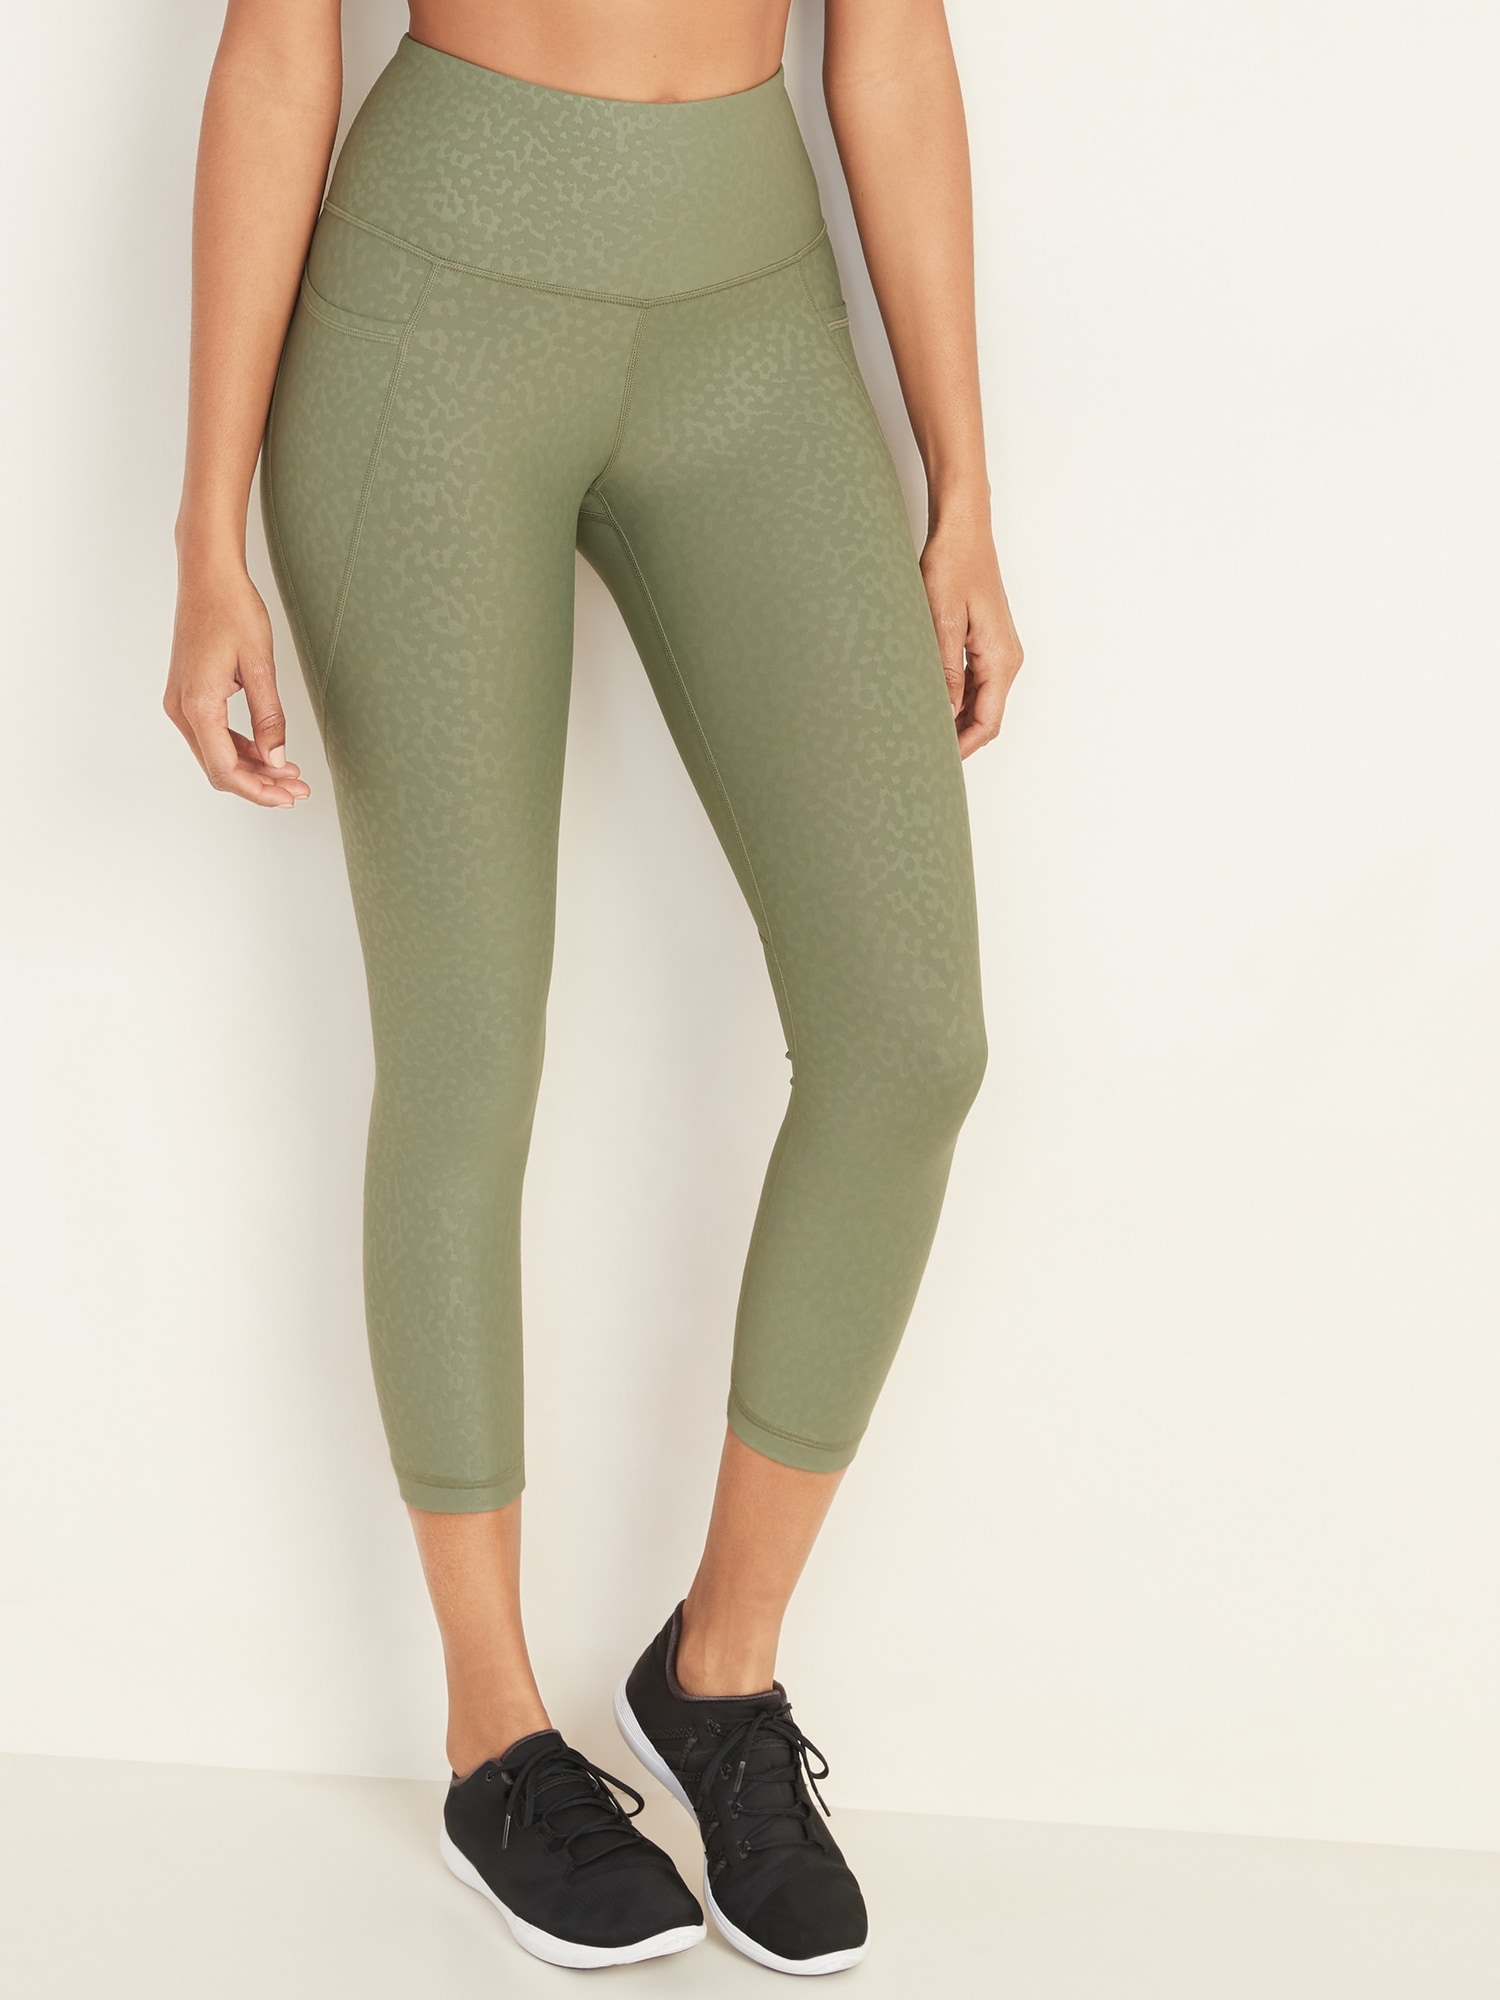 Old navy old navy high waisted elevate powersoft plus size leggings